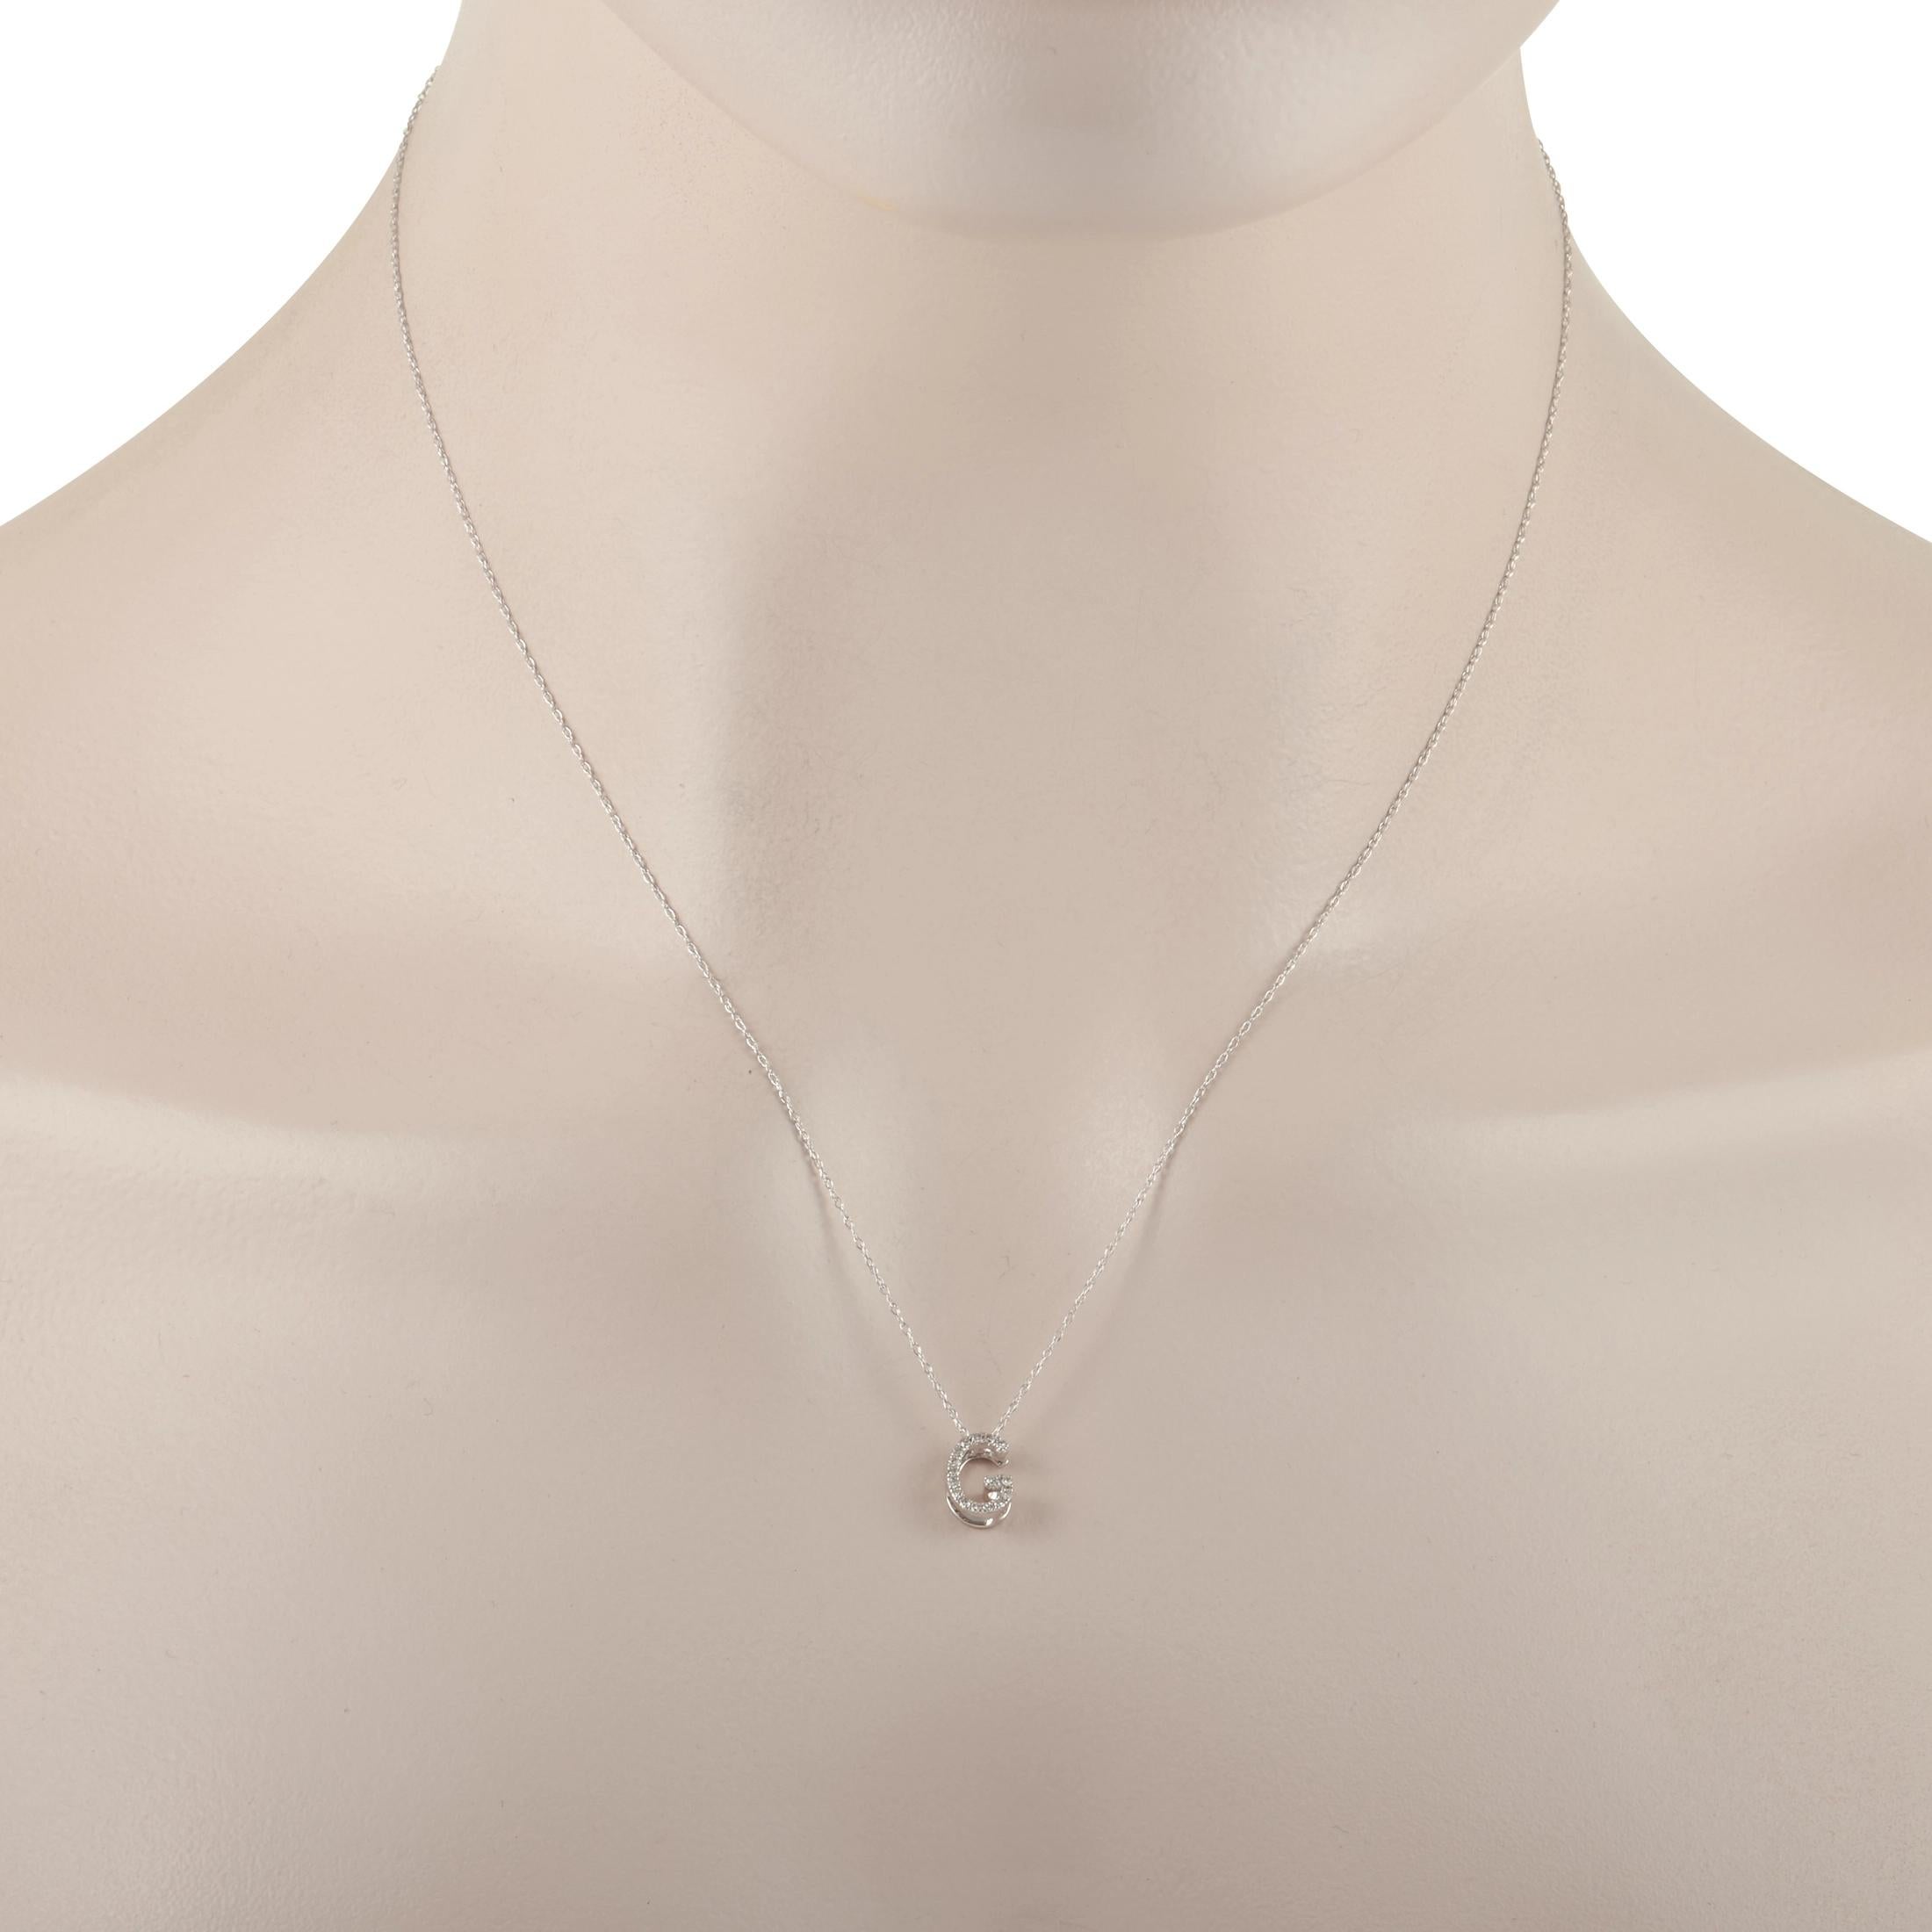 Add your signature to any look with the help of this charming 14K White Gold pendant necklace. Glittering diamonds with a total weight of 0.10 carats bring the sweet, sophisticated 0.38” letter “G” pendant to life. It’s attached to a simple white